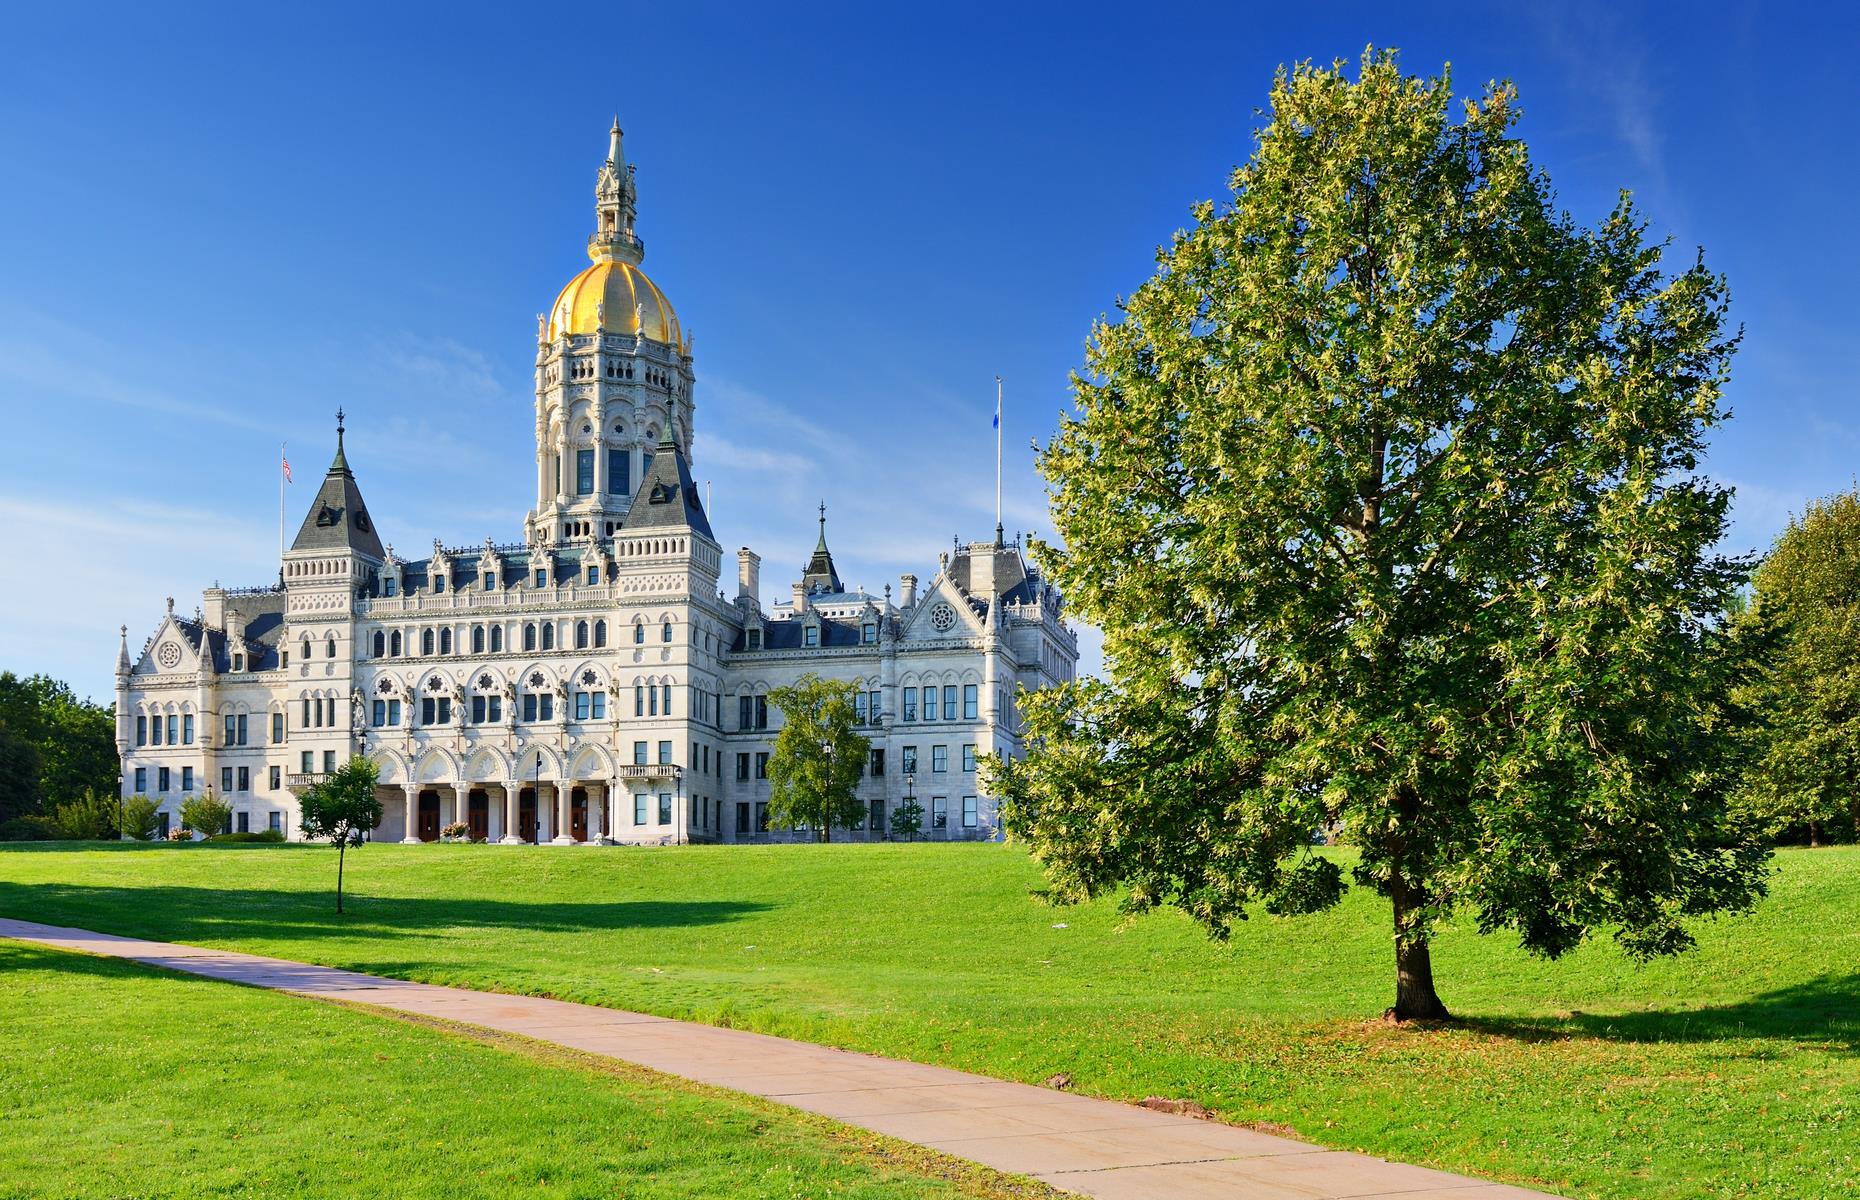 <p>Dating back to 1635, the state capital of Connecticut is a historic and cultural heavyweight. Key landmarks include the 18th-century <a href="https://www.cga.ct.gov/osh/">Old State House of Connecticut</a> and 19th-century golden-domed <a href="https://wp.cga.ct.gov/CapitolTours/">State Capitol</a>, which gleams in Bushnell Park (both are currently closed to visitors; check the websites for updates). The leafy public park is particularly picturesque in the fall. The Wadsworth Atheneum Museum of Art, America's first public art museum when it opened in 1842, wows with its priceless works of art. It's currently closed; <a href="https://www.thewadsworth.org/covid-19-response/">check the website</a> for updates.</p>